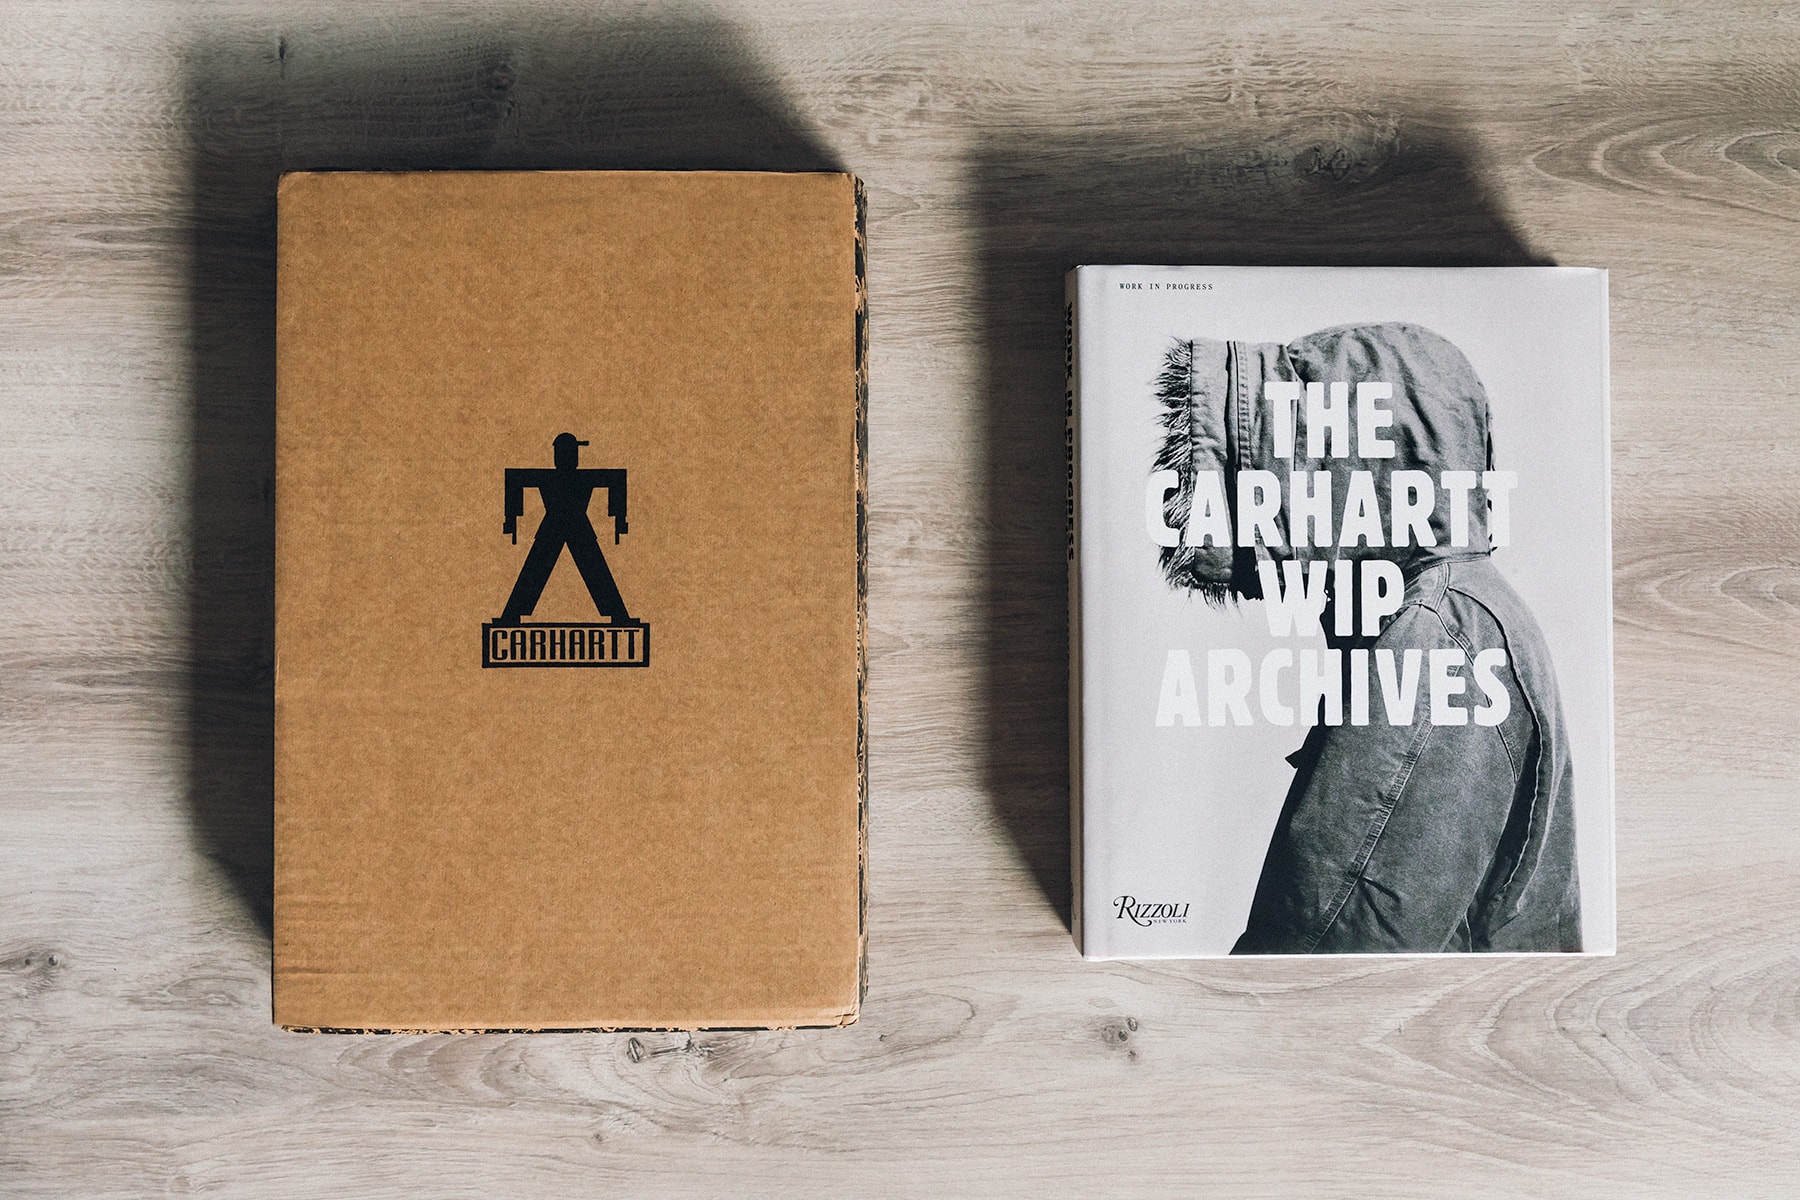 The Carhartt WIP Archives Rizzoli Book